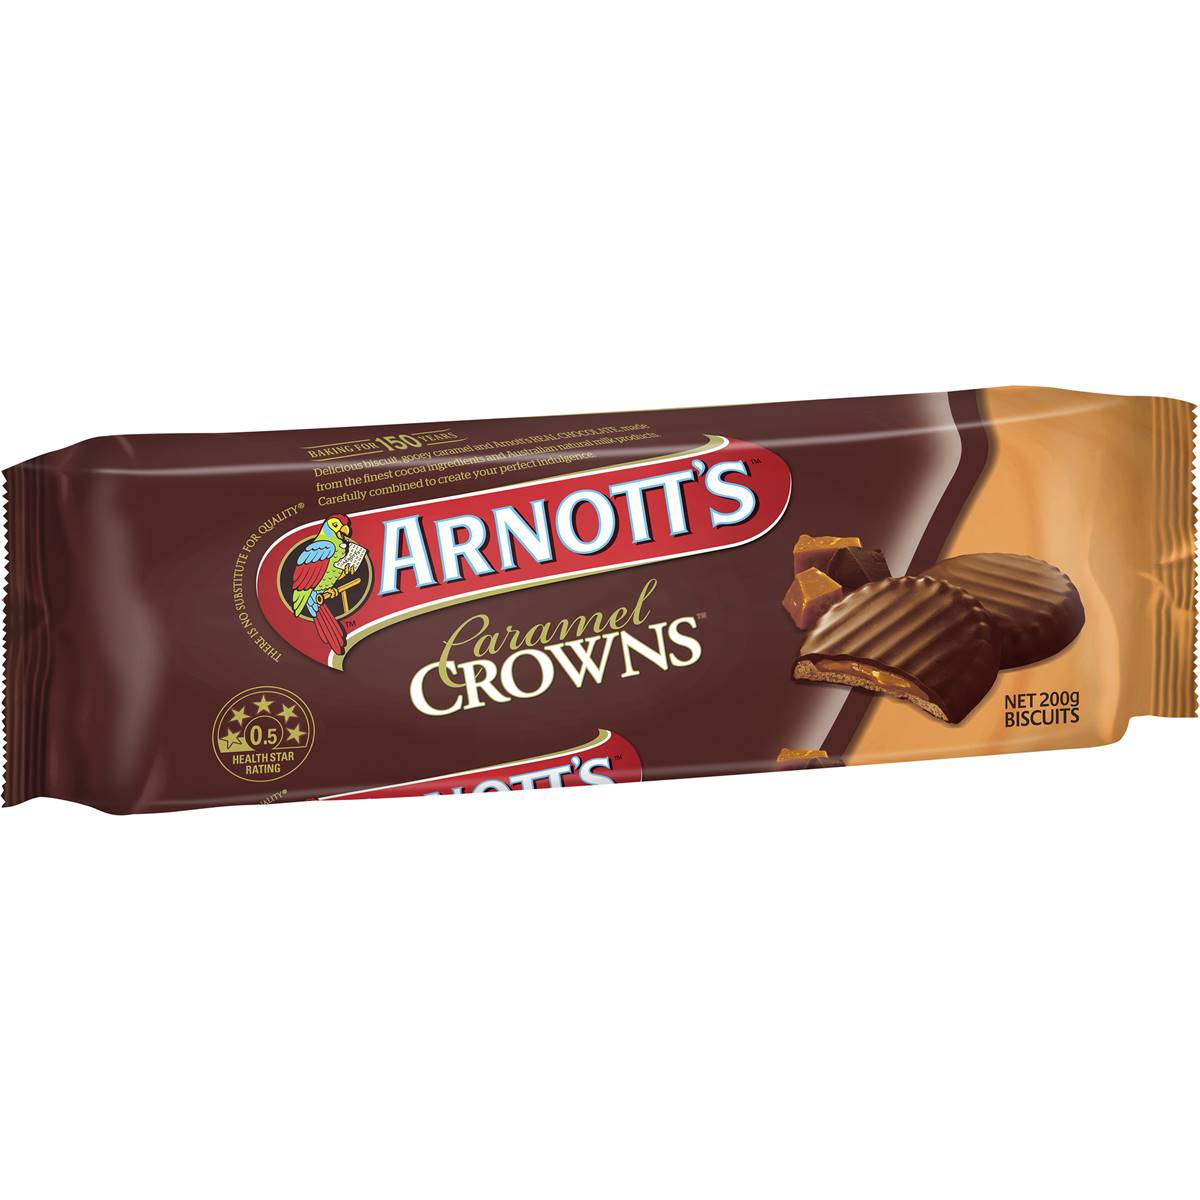 Arnotts Caramel Crowns Chocolate Biscuits 200g